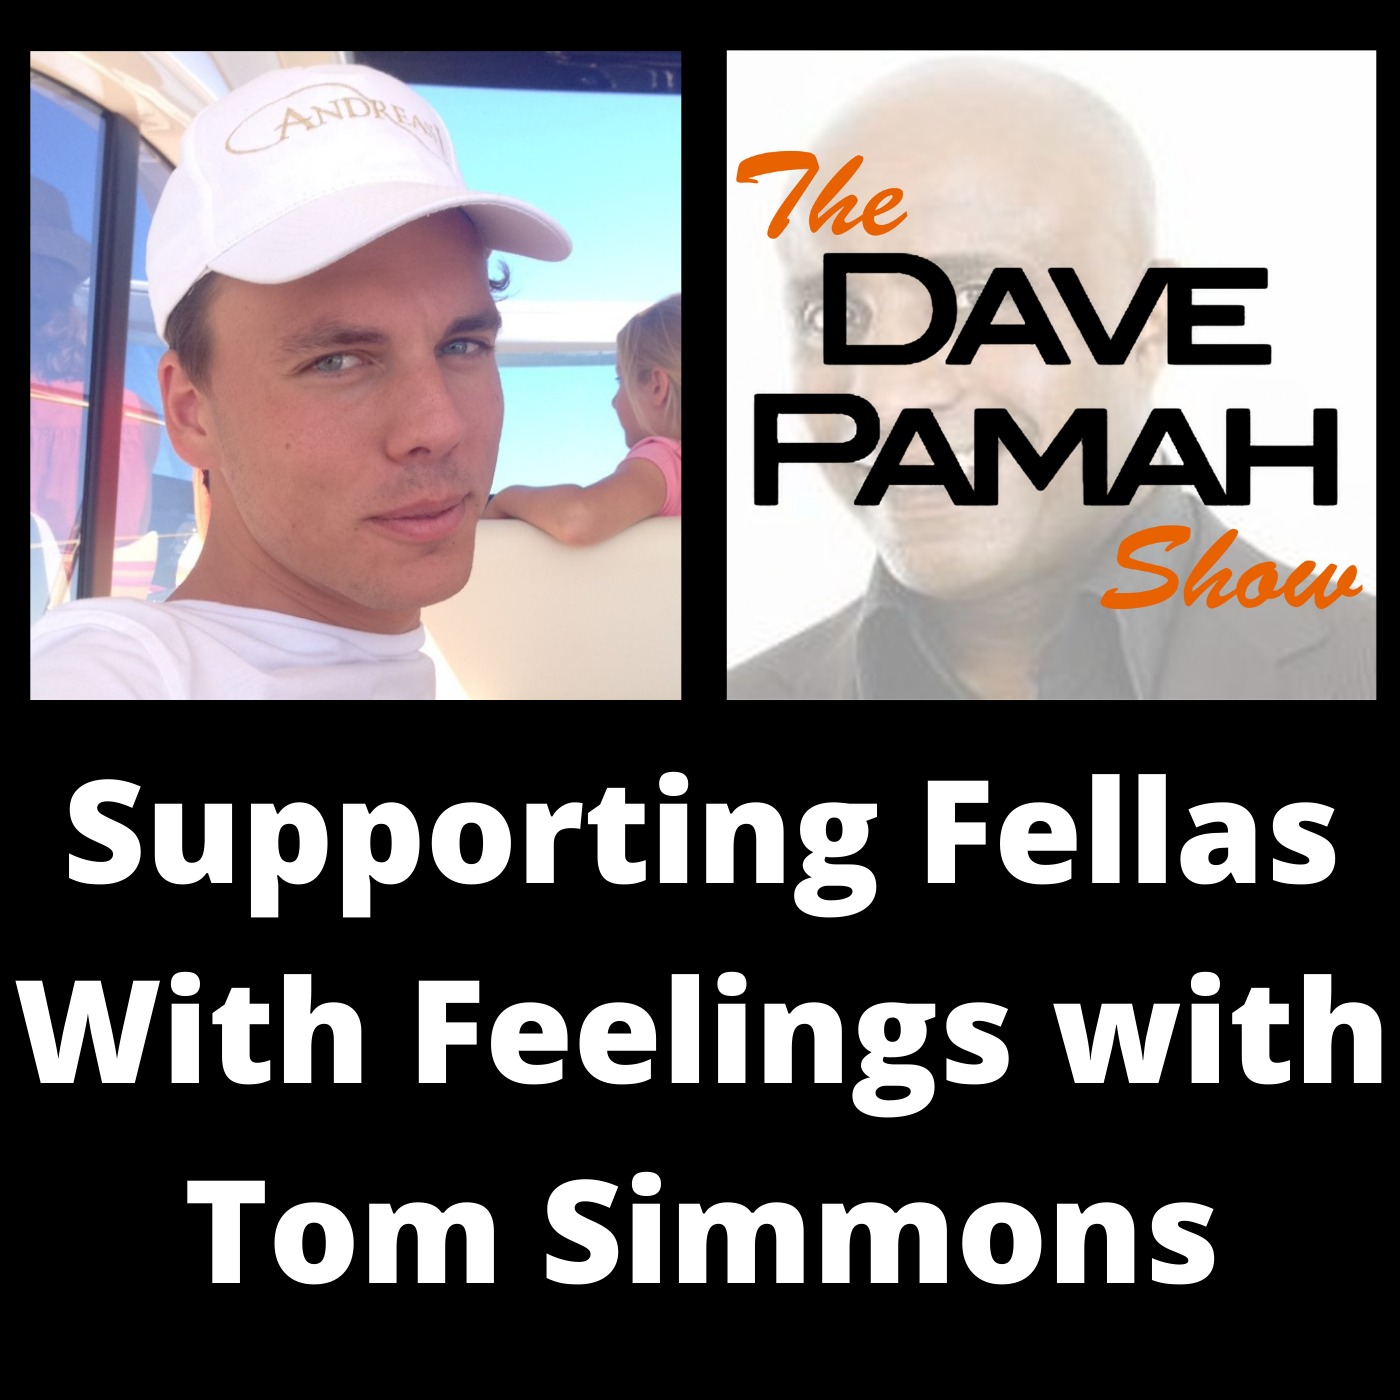 Supporting Fellas With Feelings with Tom Simmons